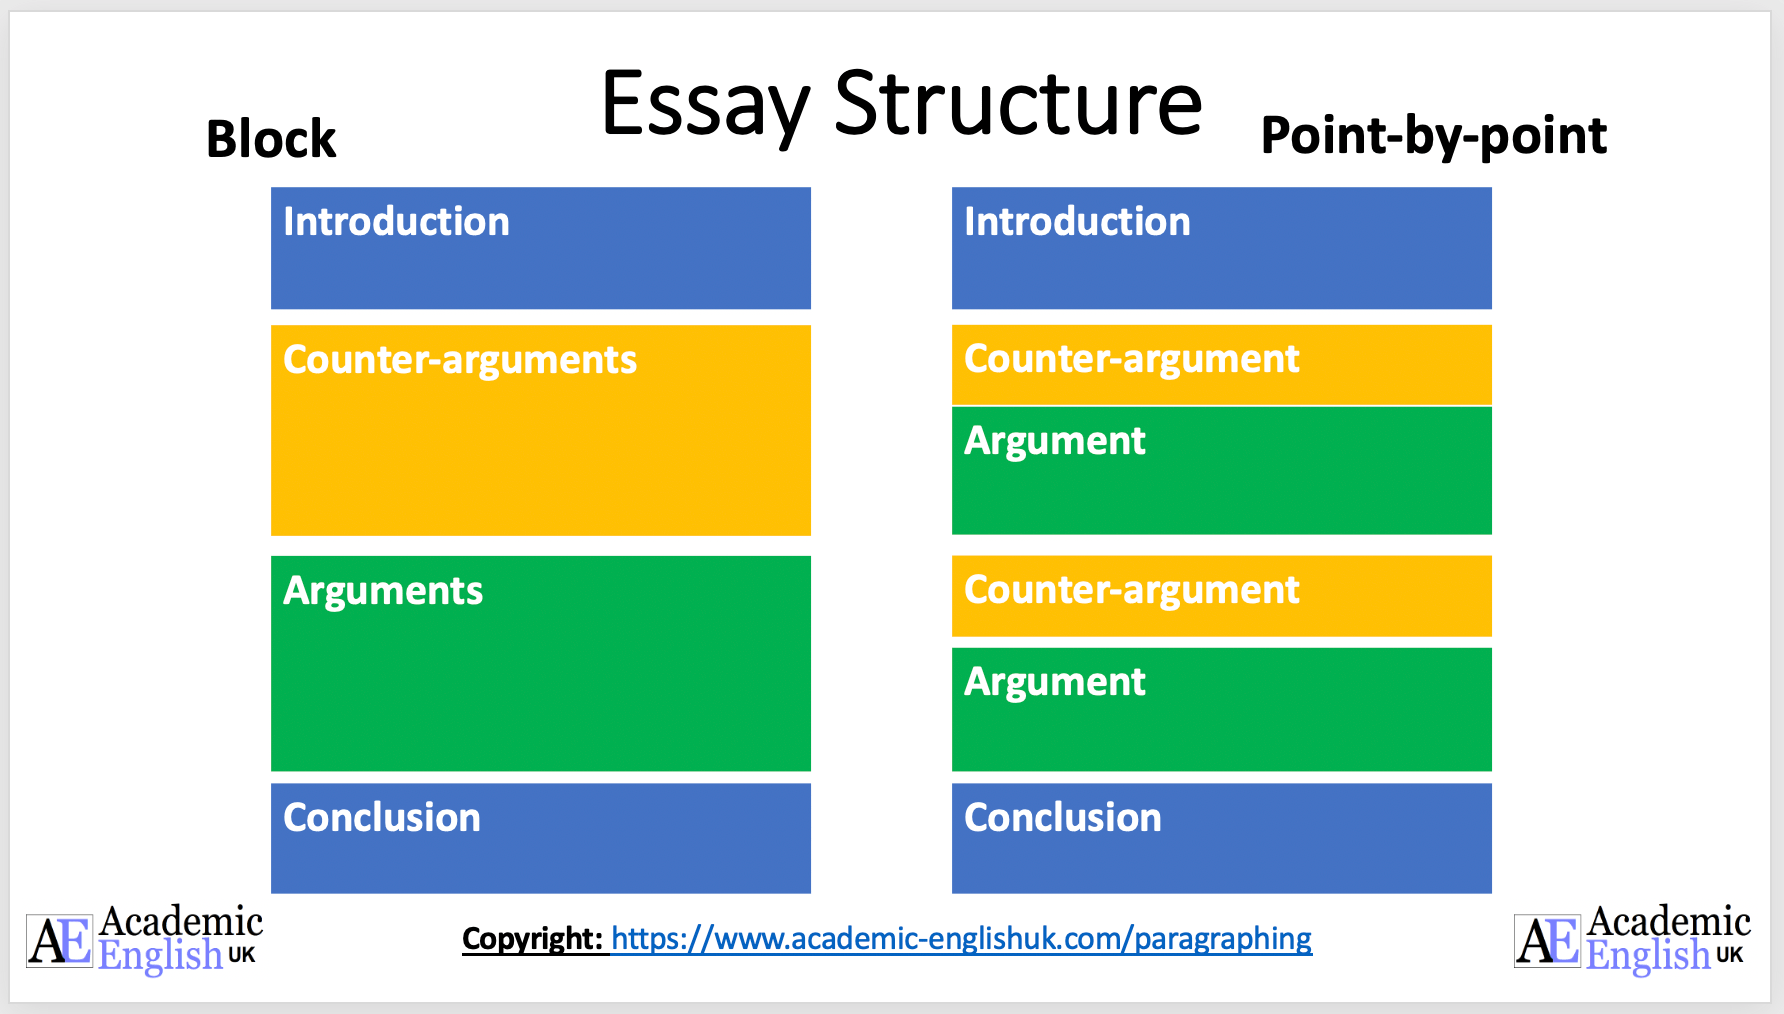 Paragraph structure block or point-by-point